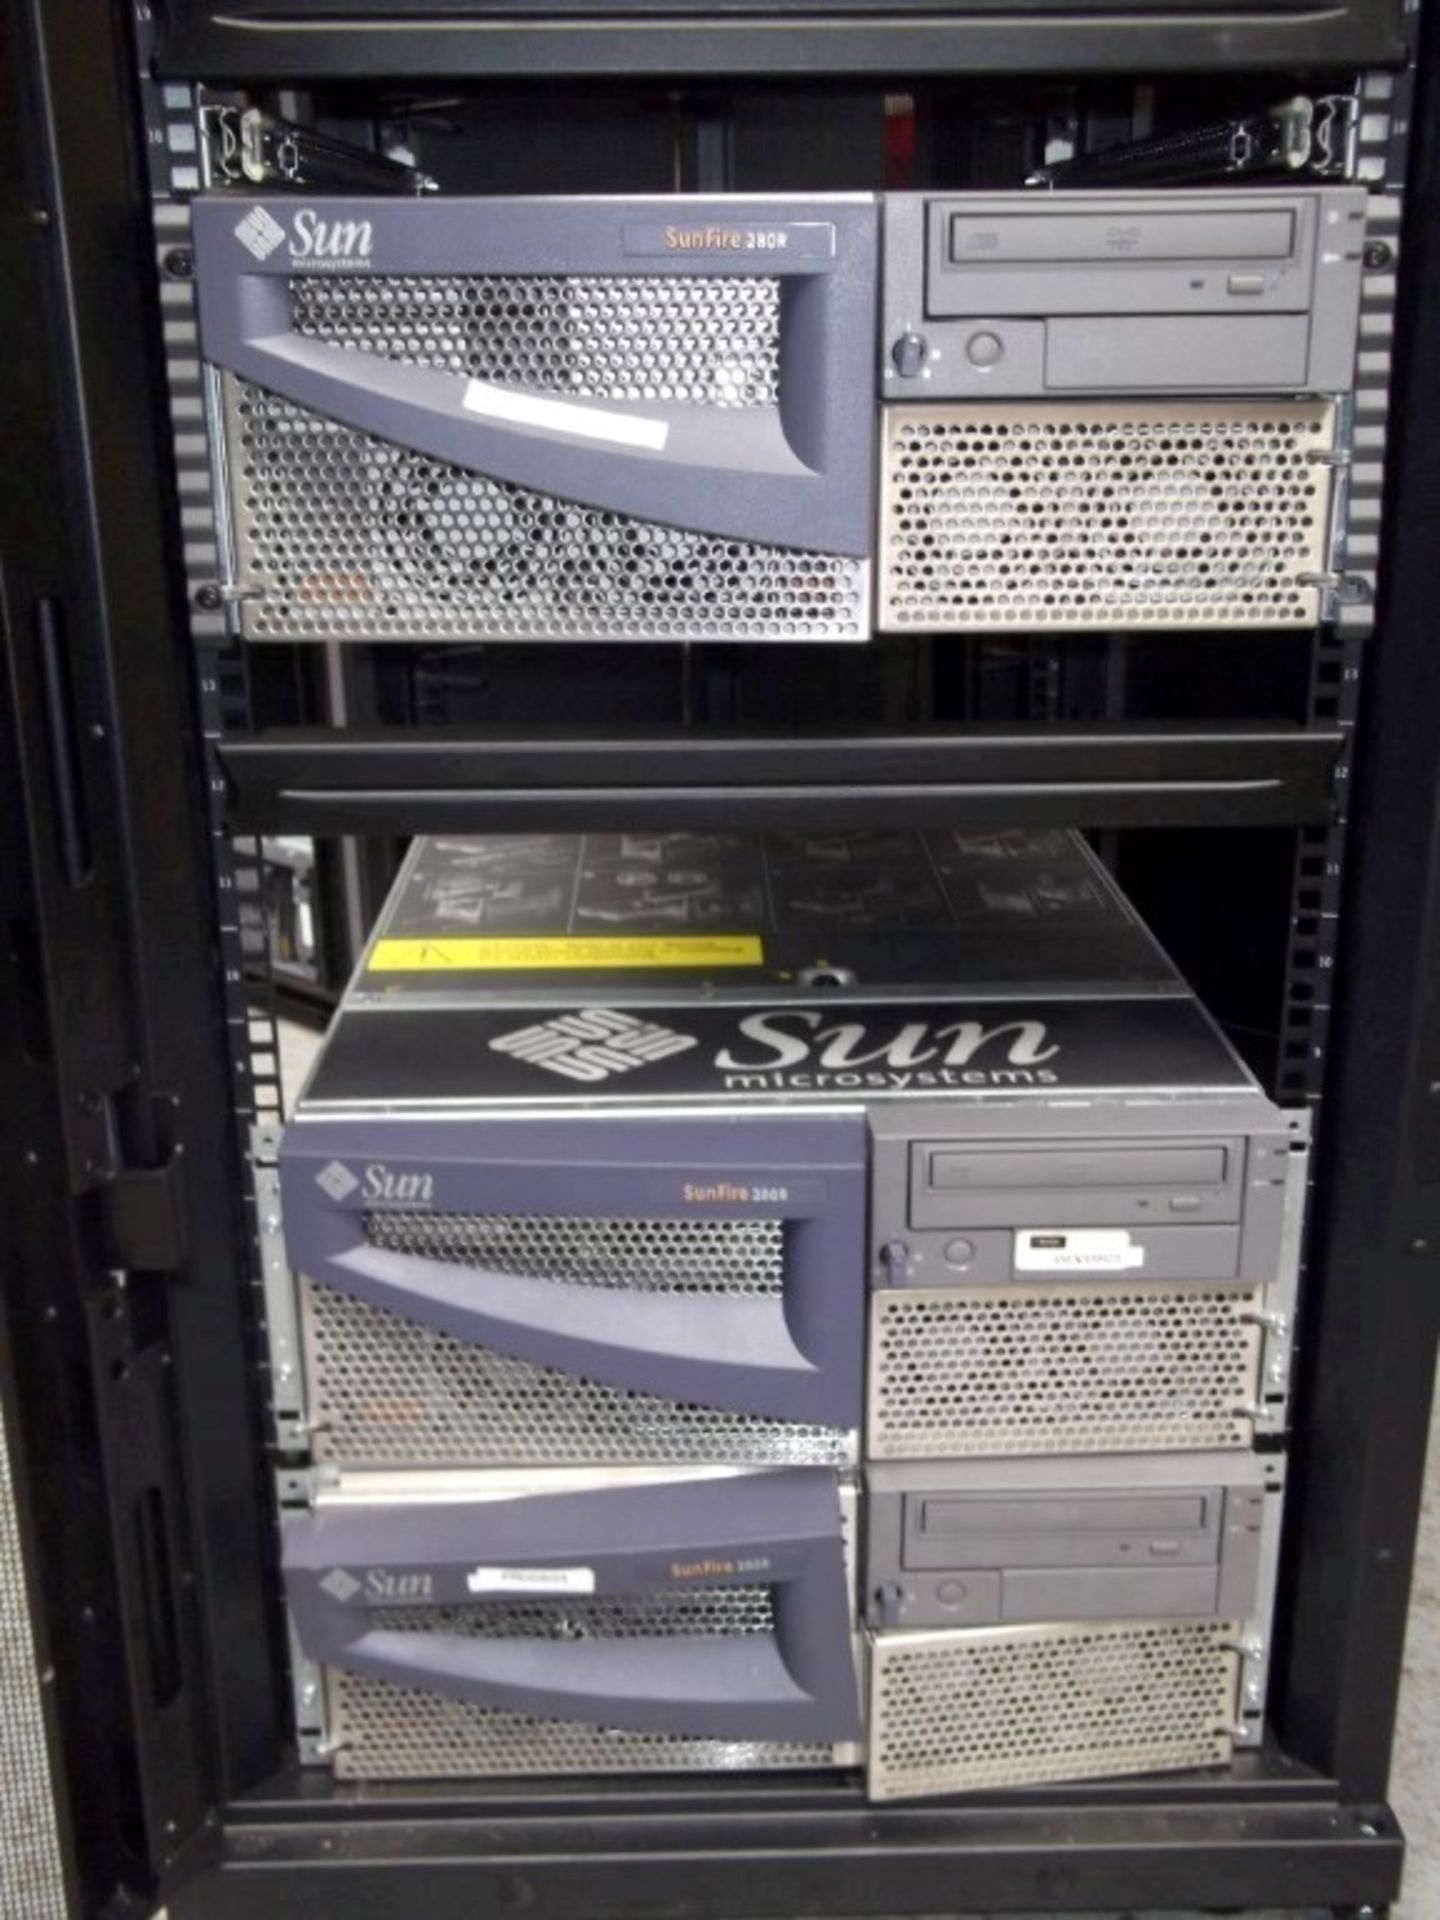 1 x APC Netshelter Server Rack With 12 x Assorted Sun Fire & HP Proliant Filer Systems Including - Image 9 of 9